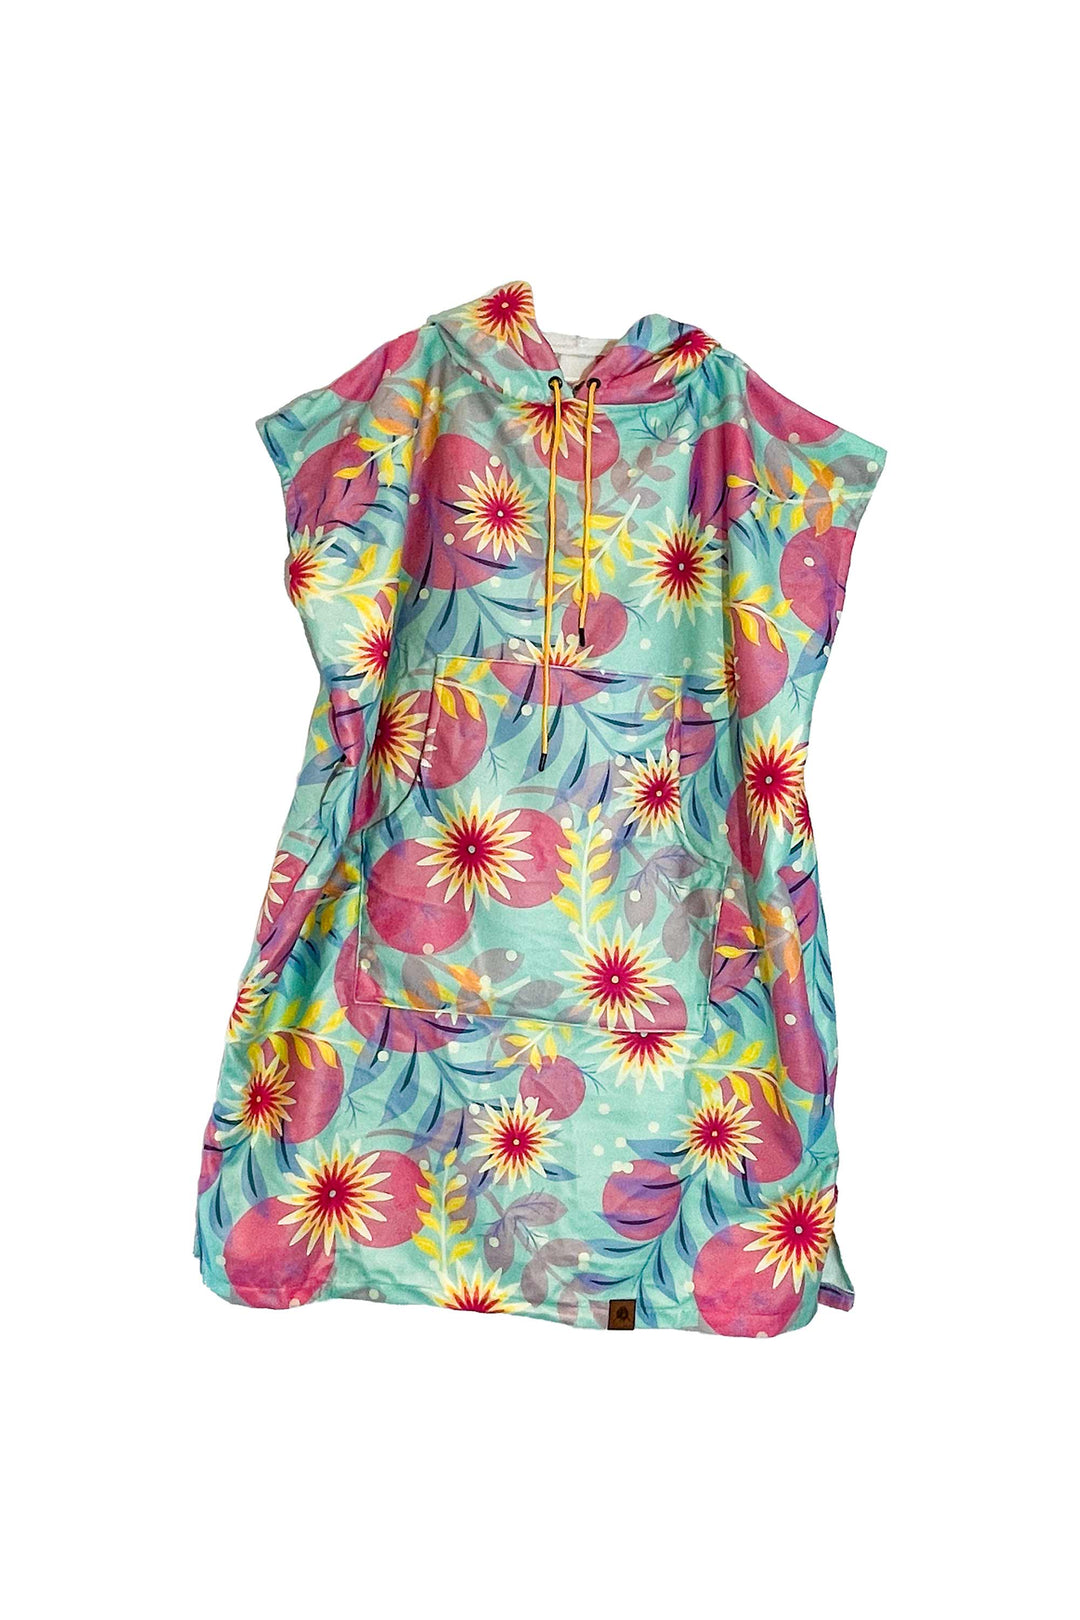 Travel Surfponcho FLOWERS adult